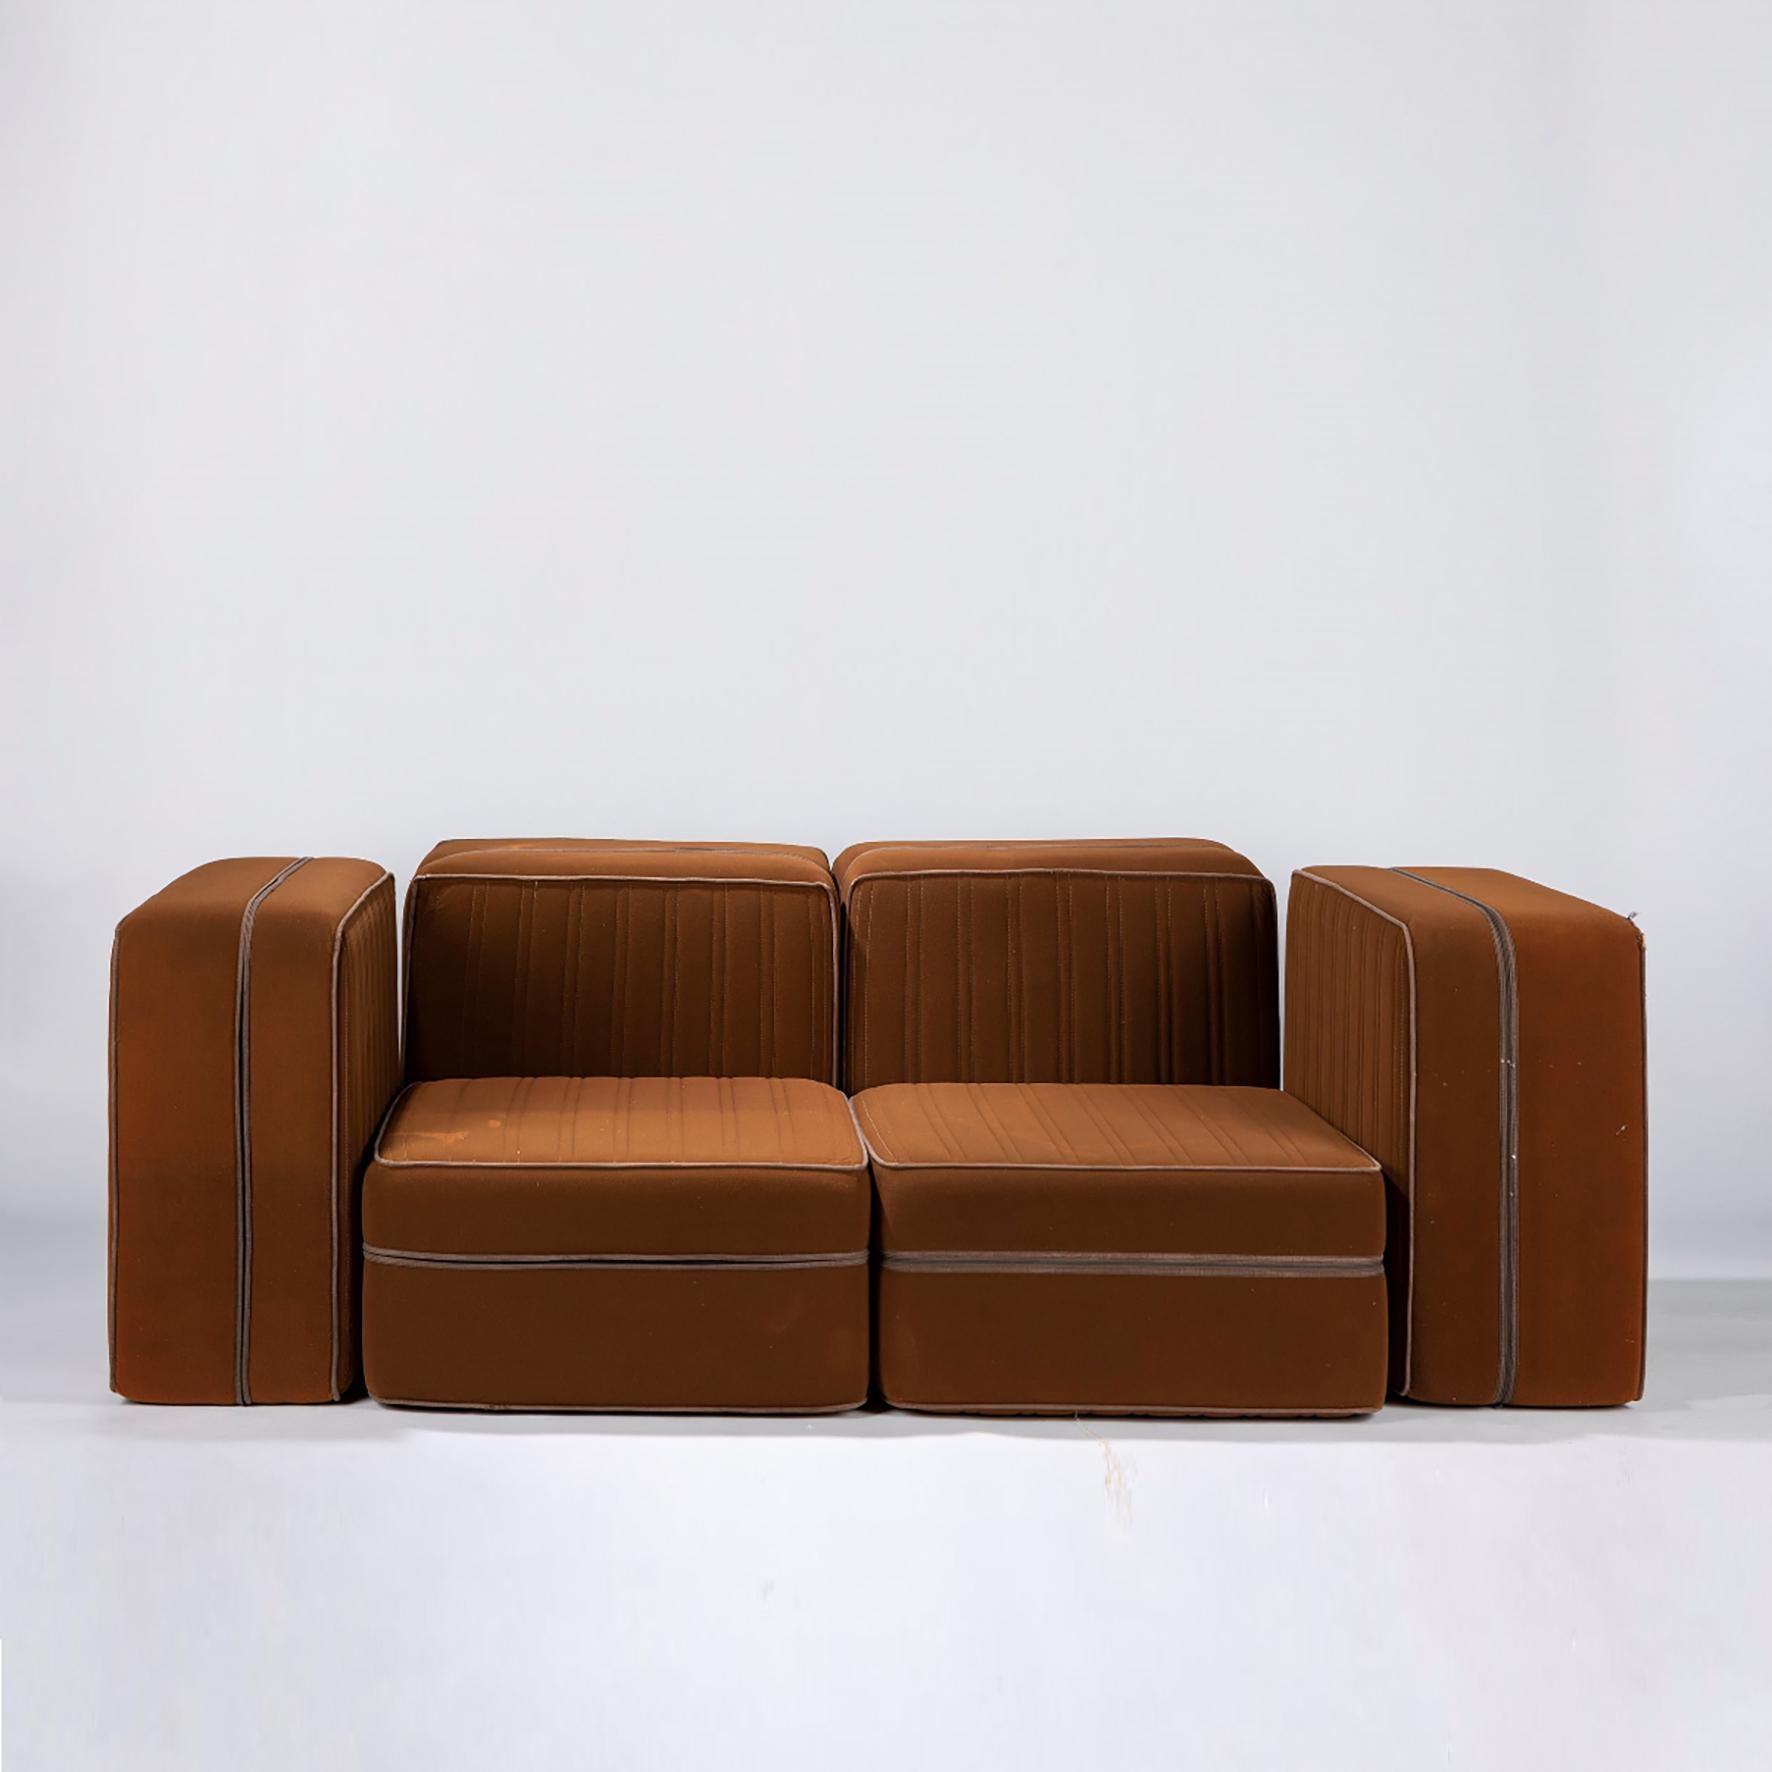 De Pas, D’Urbino, Lomazzi

Settebello

A modular sofa system, made of six rectangular polyurethane elements covered with brown fabric joined with straps.
Produit par Zanotta, Milan, Italy.
1974.

Dimensions of each element
Height : 30